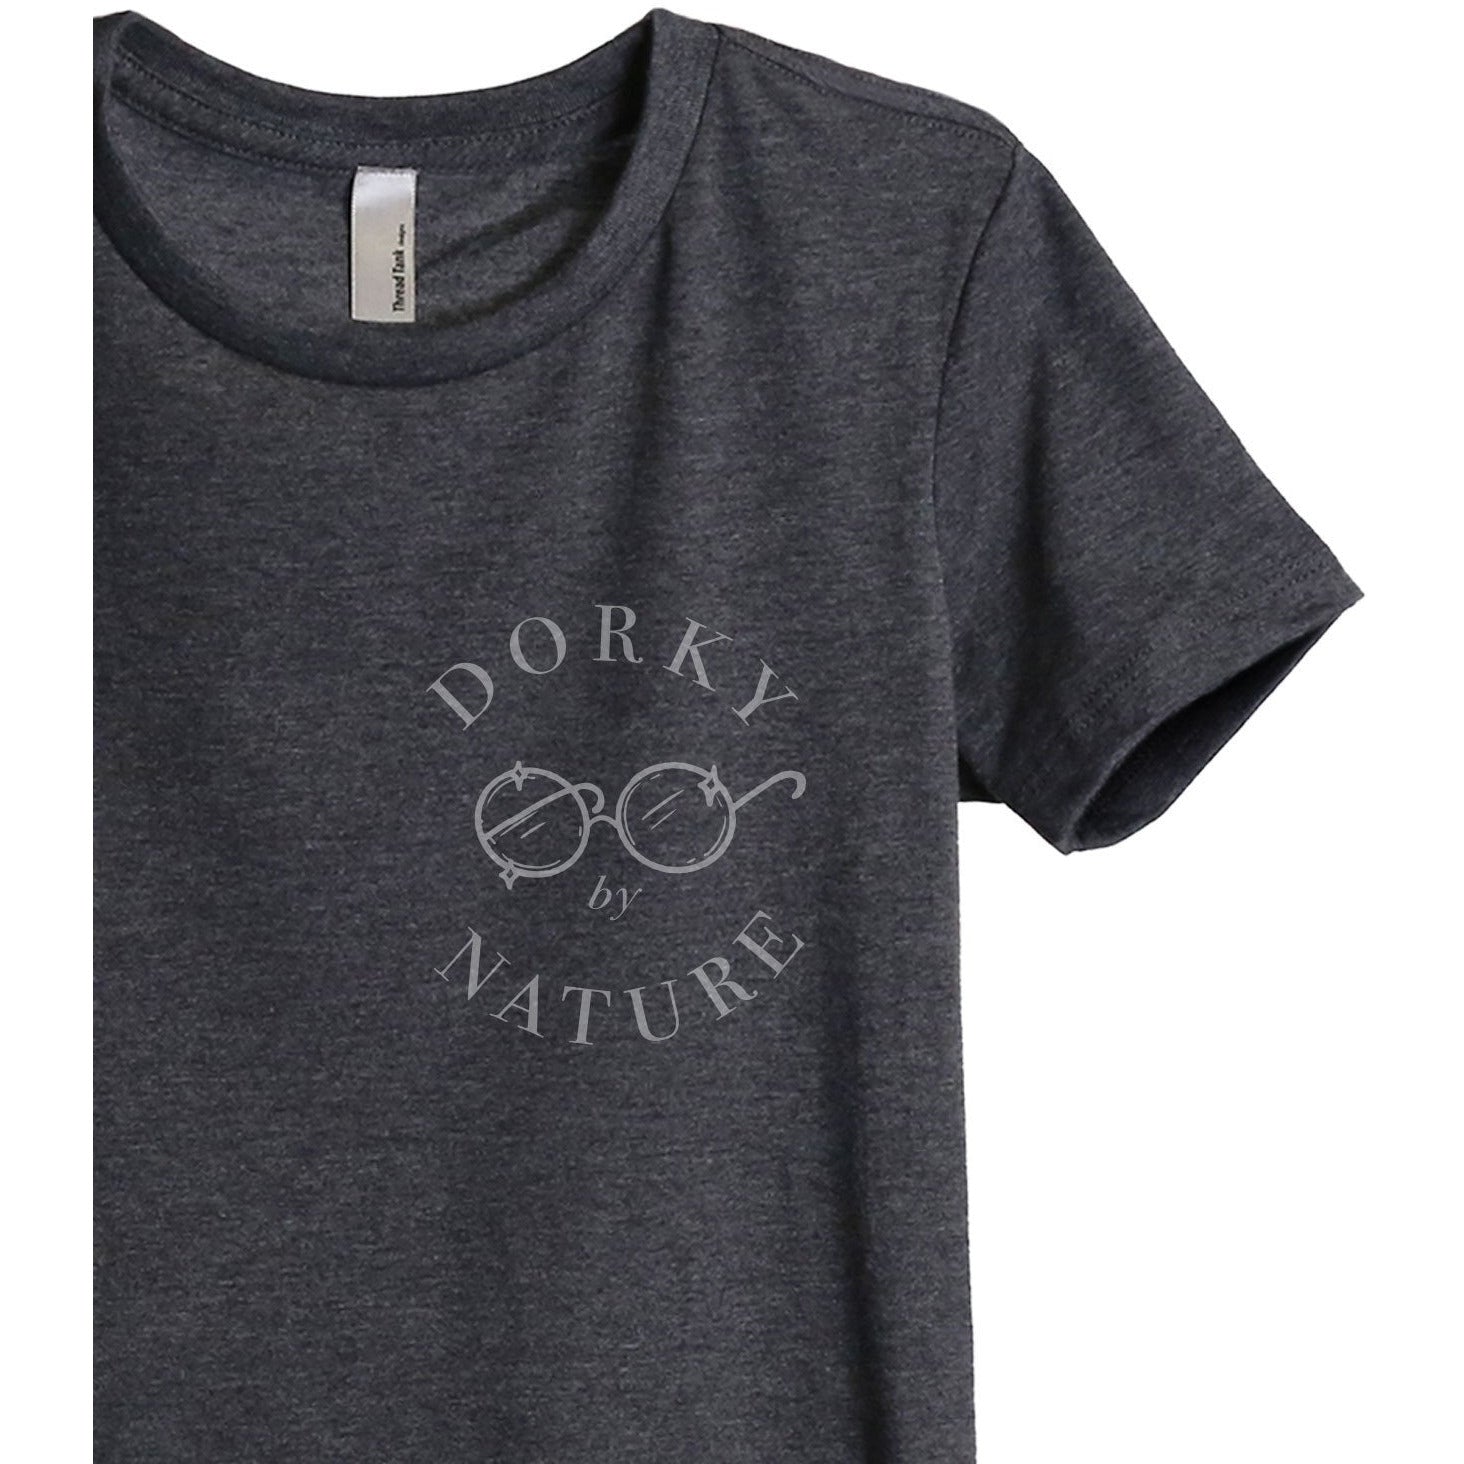 Dorky By Nature Women's Relaxed Crewneck T-Shirt Top Tee Charcoal Grey
